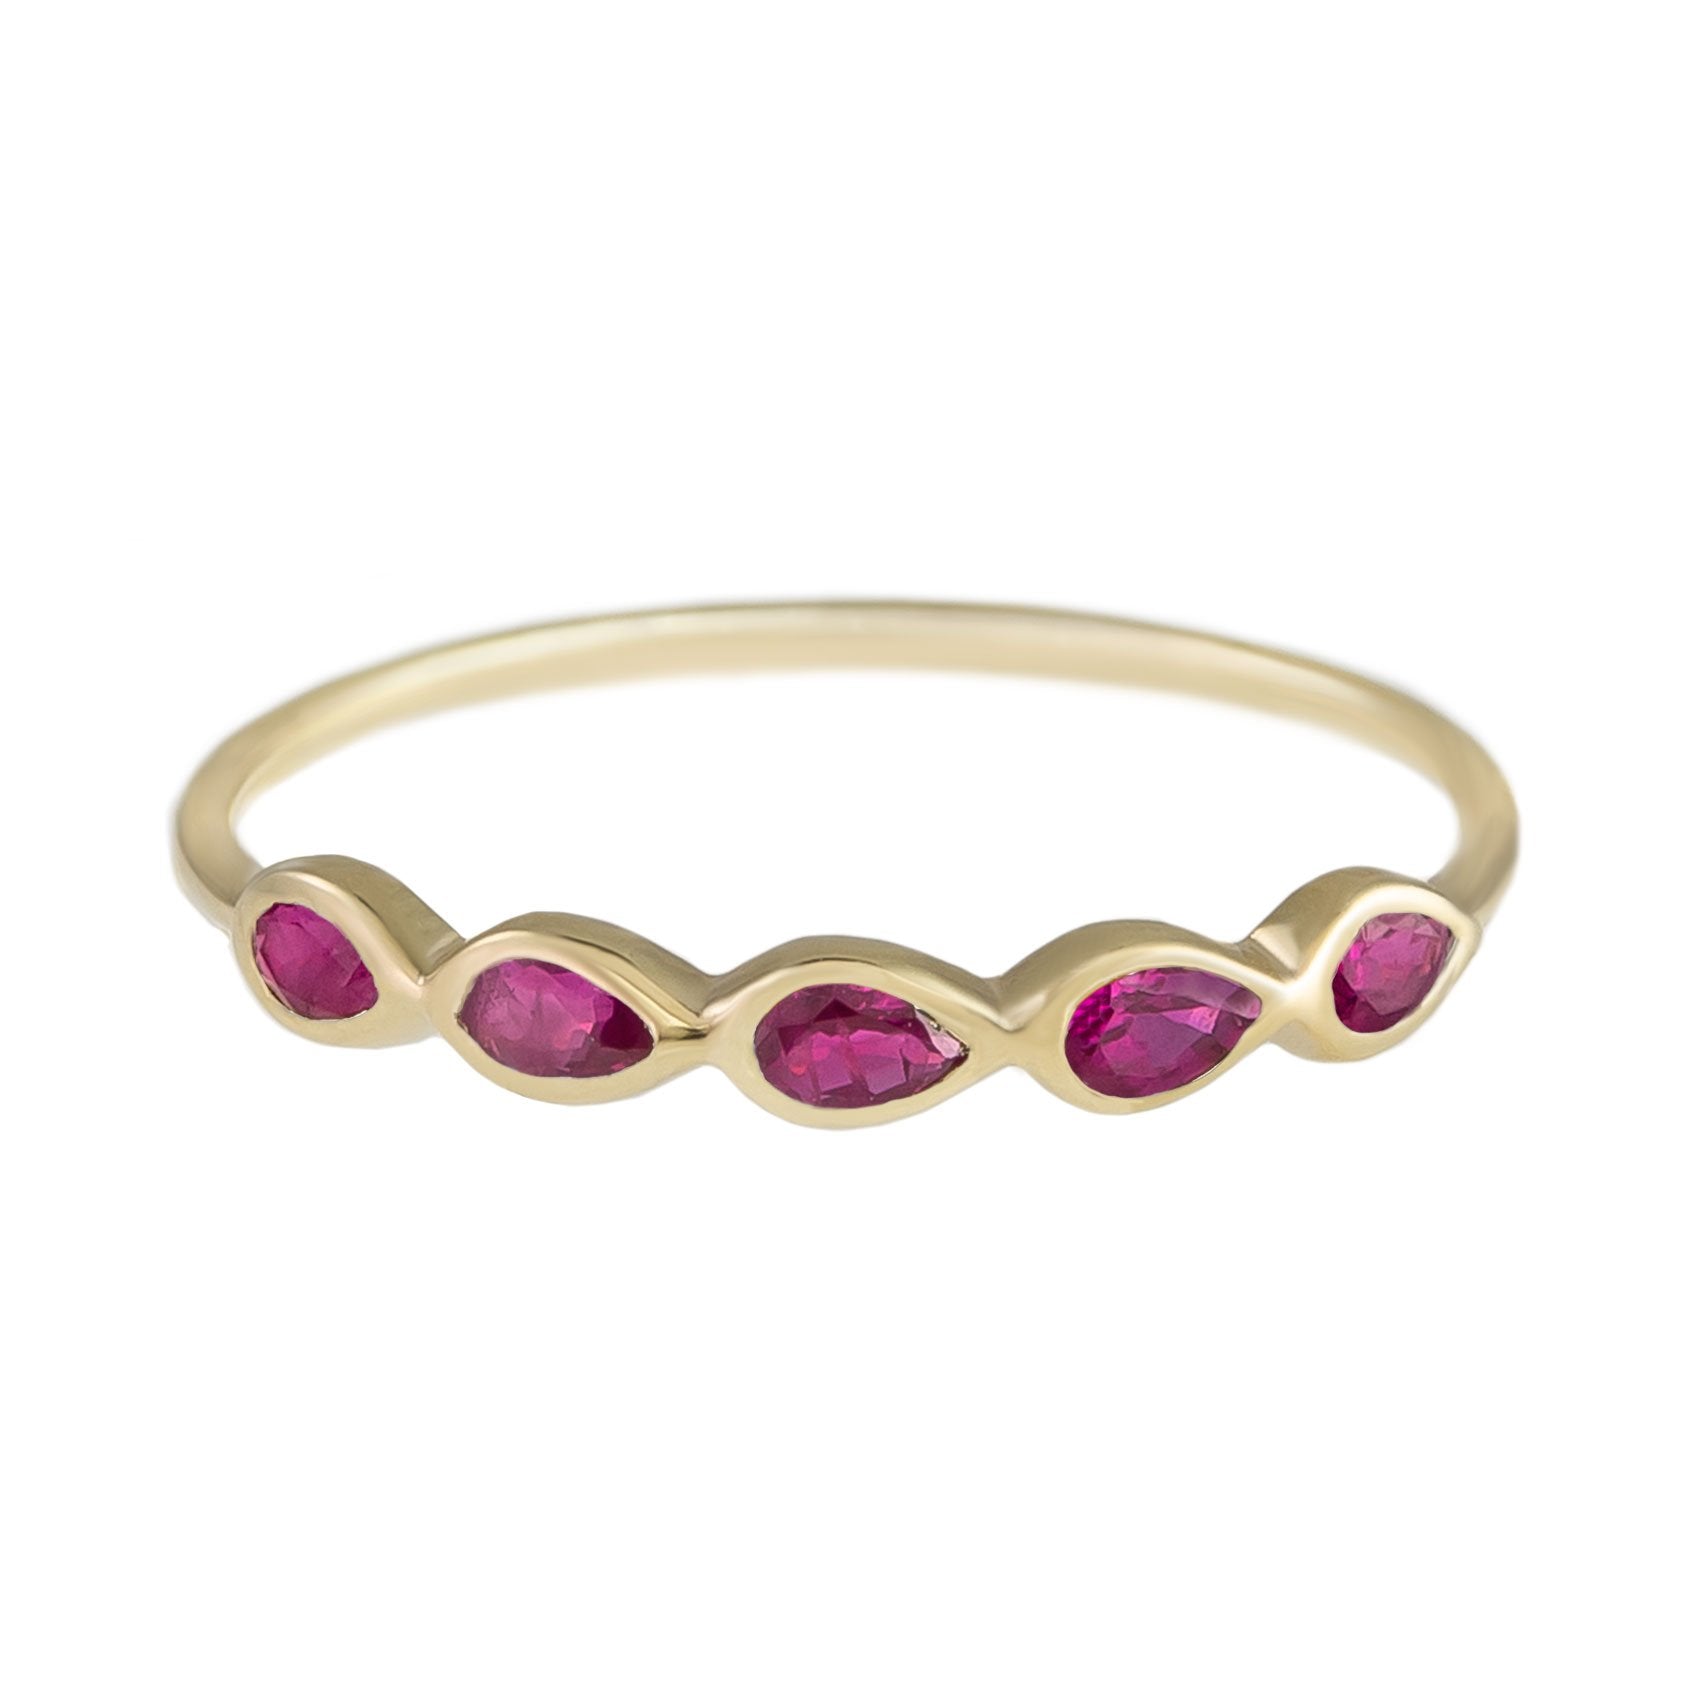 metier by tomfoolery 5 stone ruby ring in 9ct yellow gold with pear cut rubies